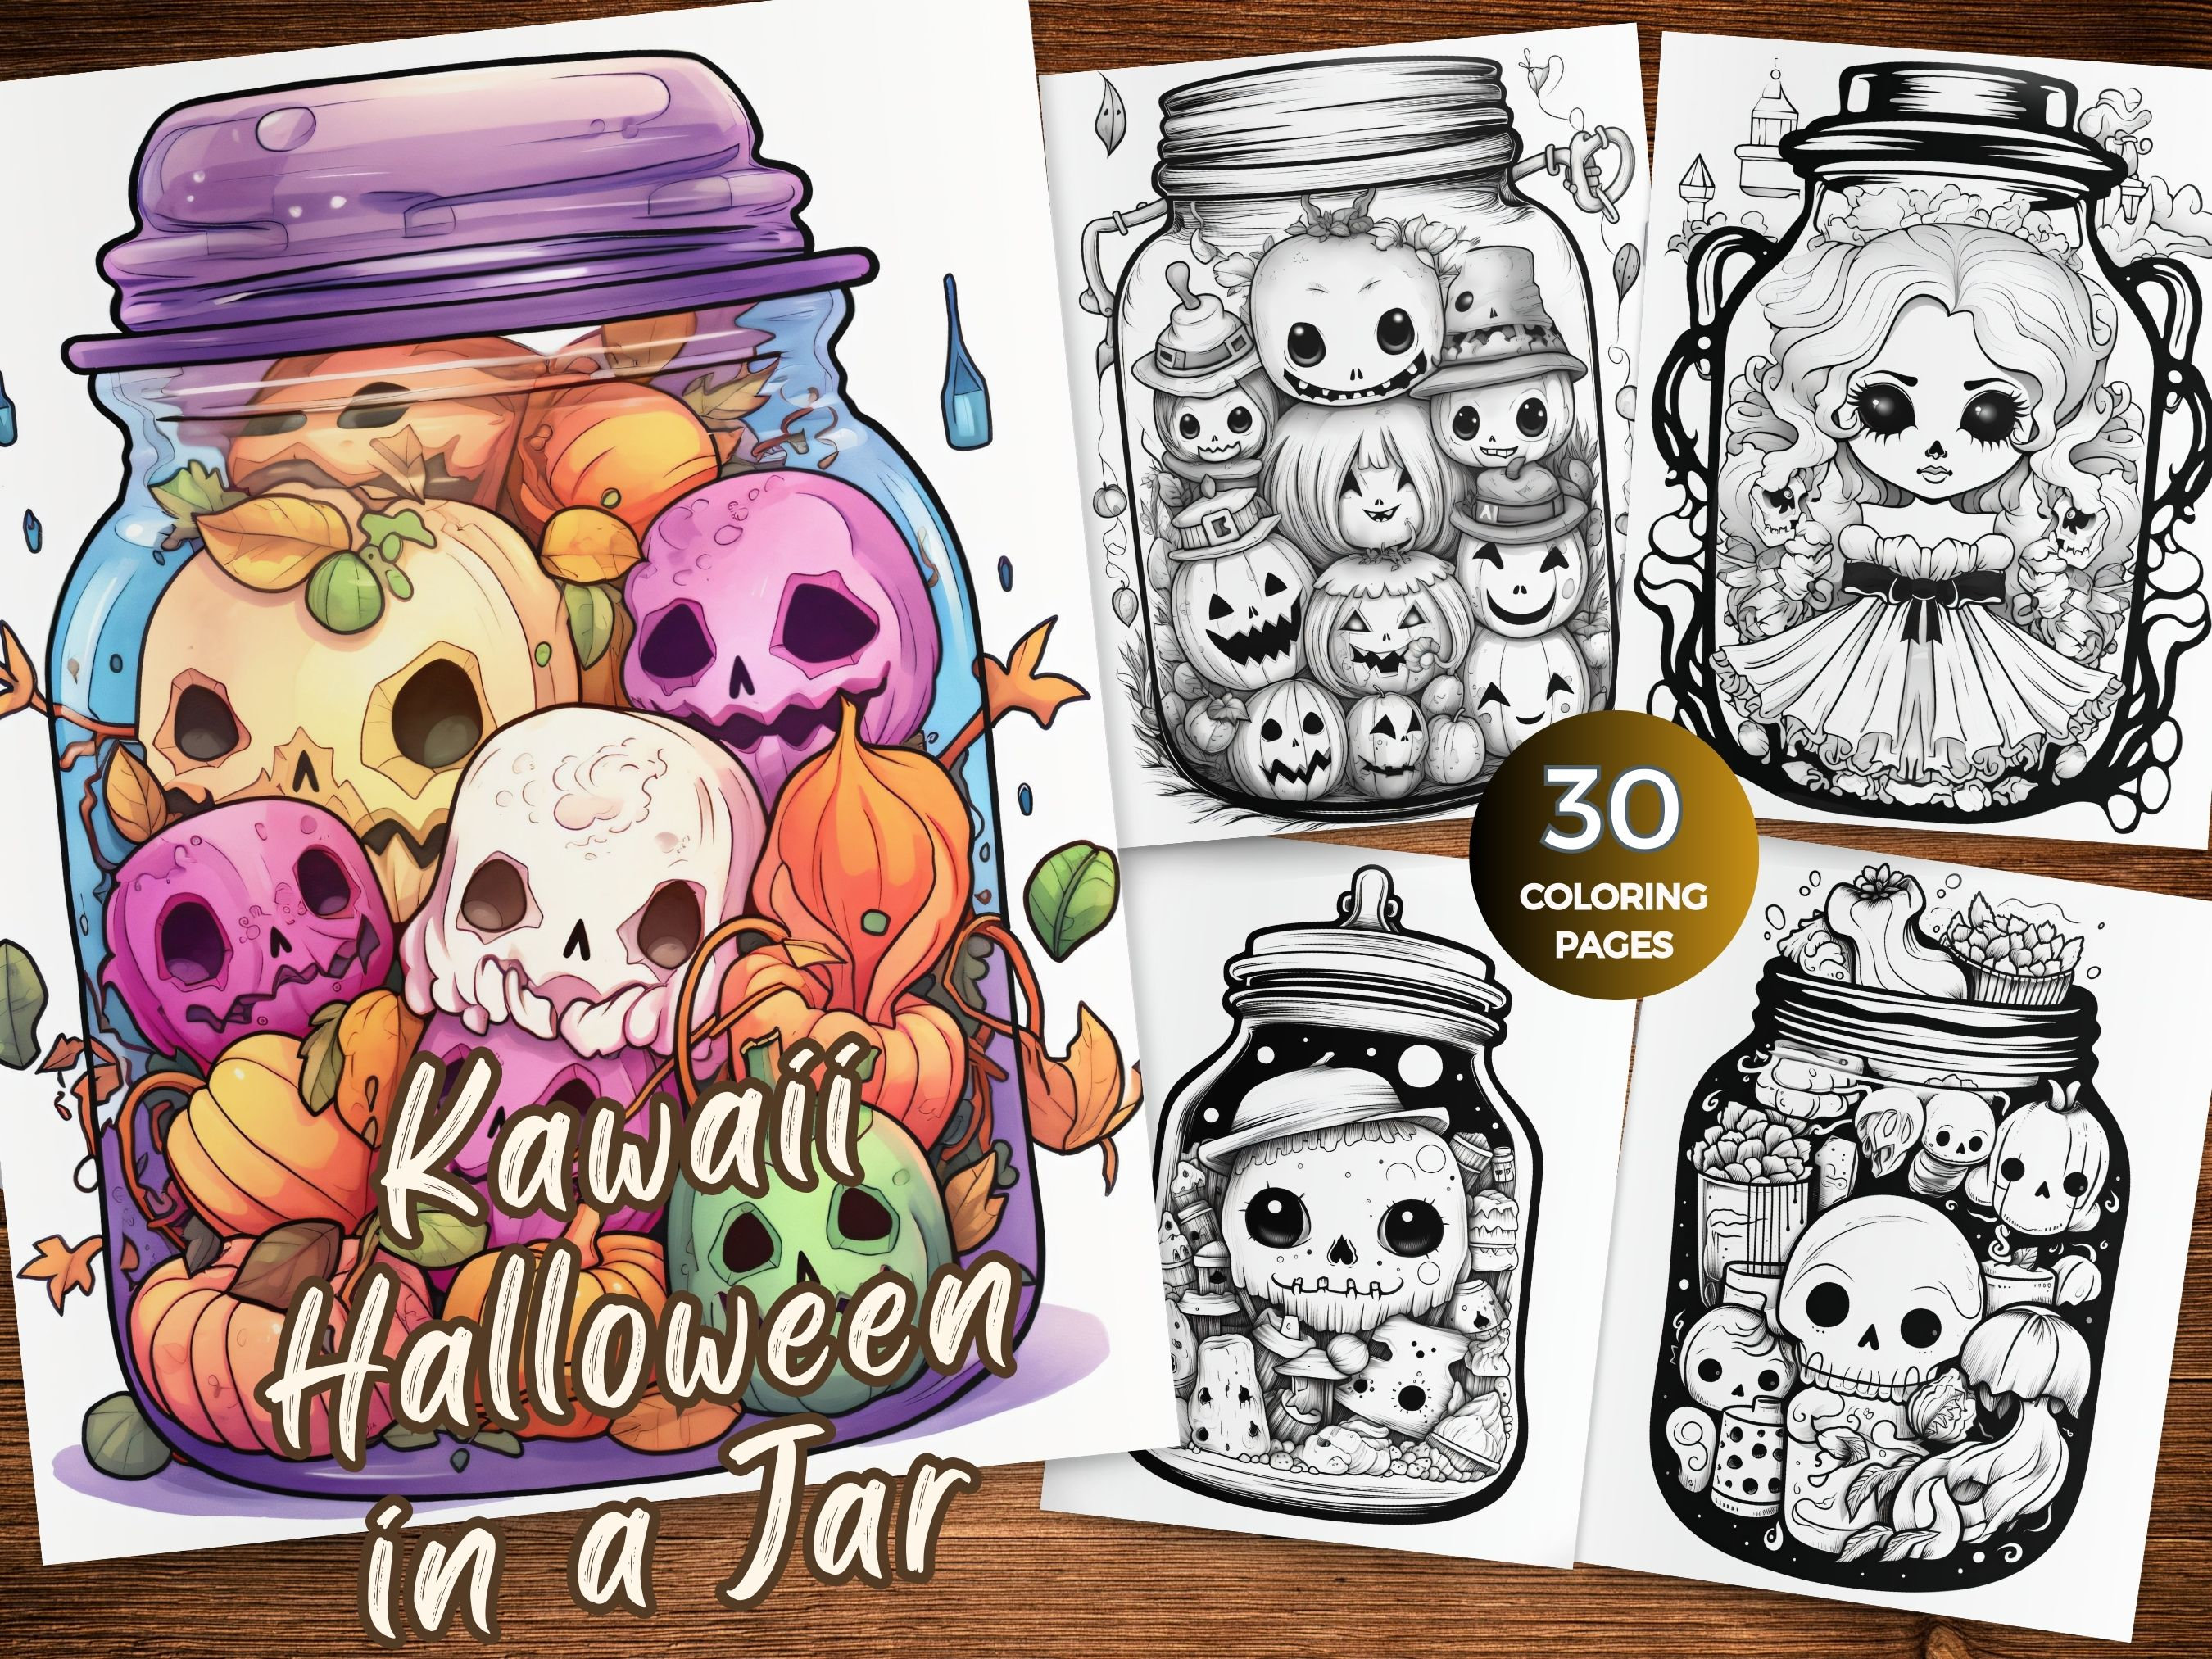 Cute kawaii halloween coloring pages of kawaii halloween in a jar coloring book instant download spooky kawaii grayscale coloring sheets